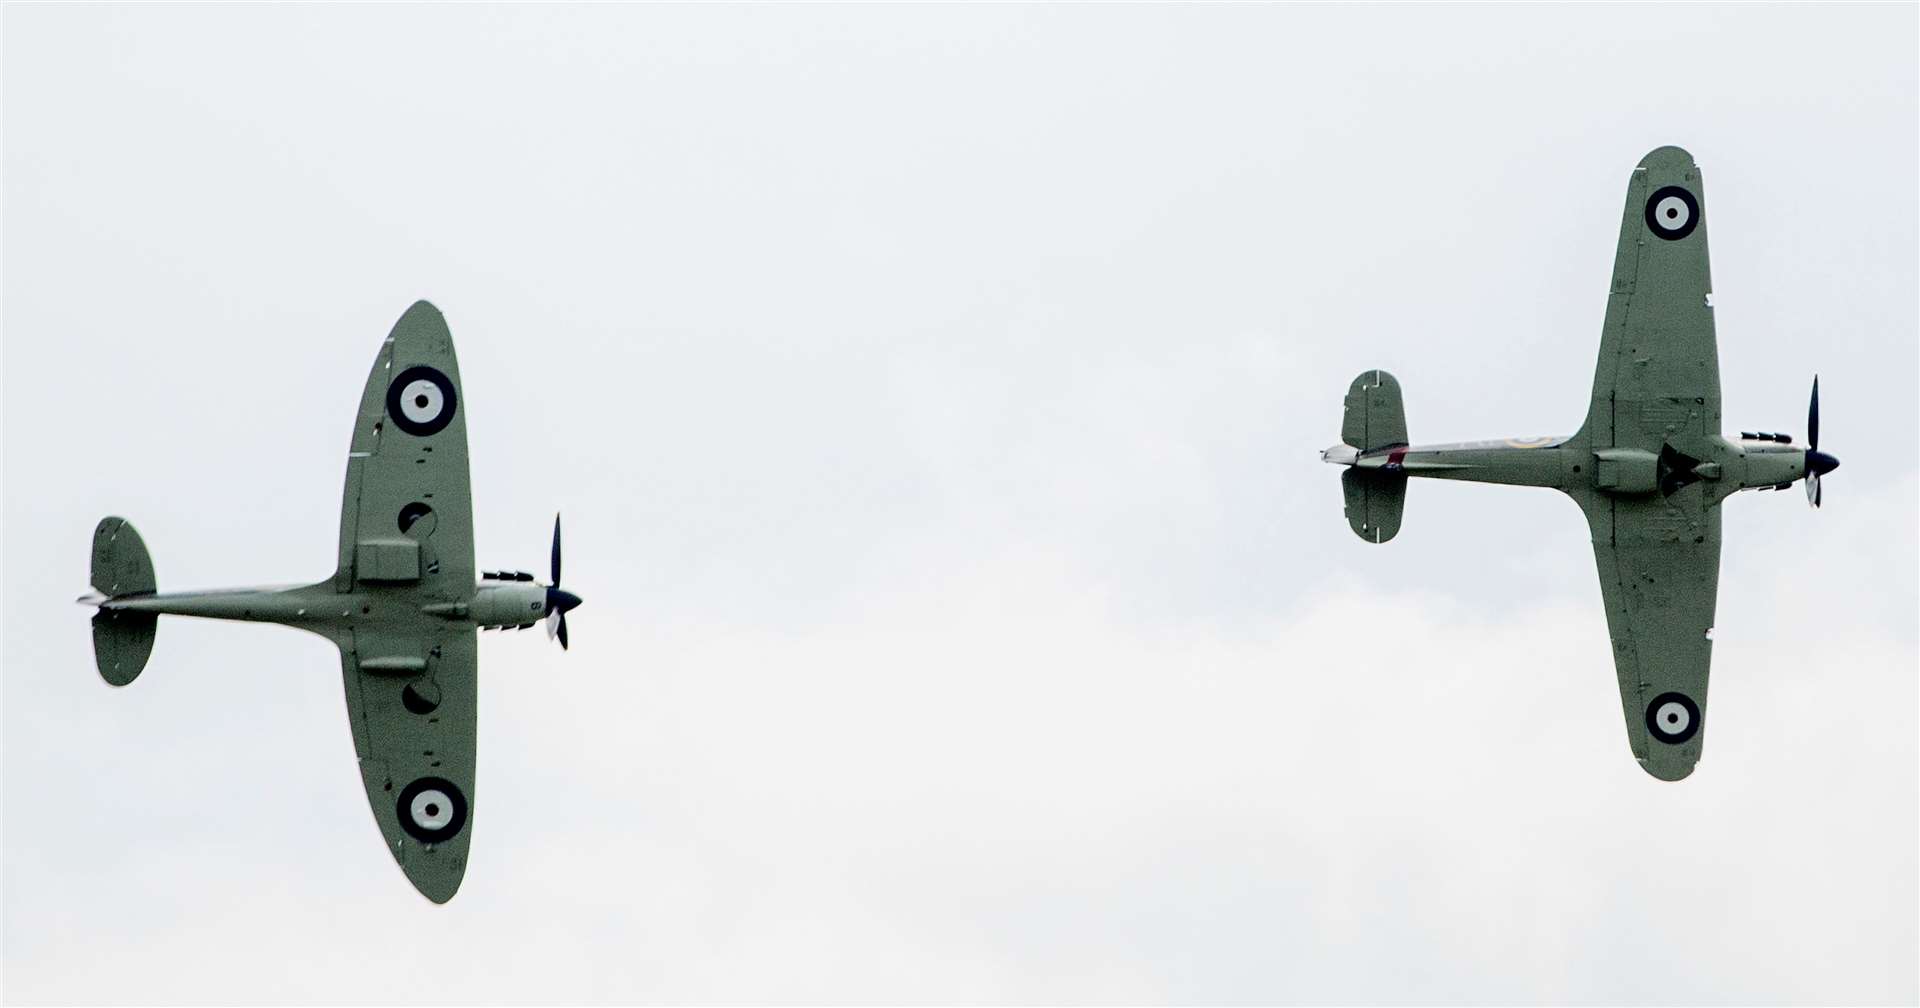 A Hurricane and Spitfire in action at an airshow. Photo: Mark Williamson